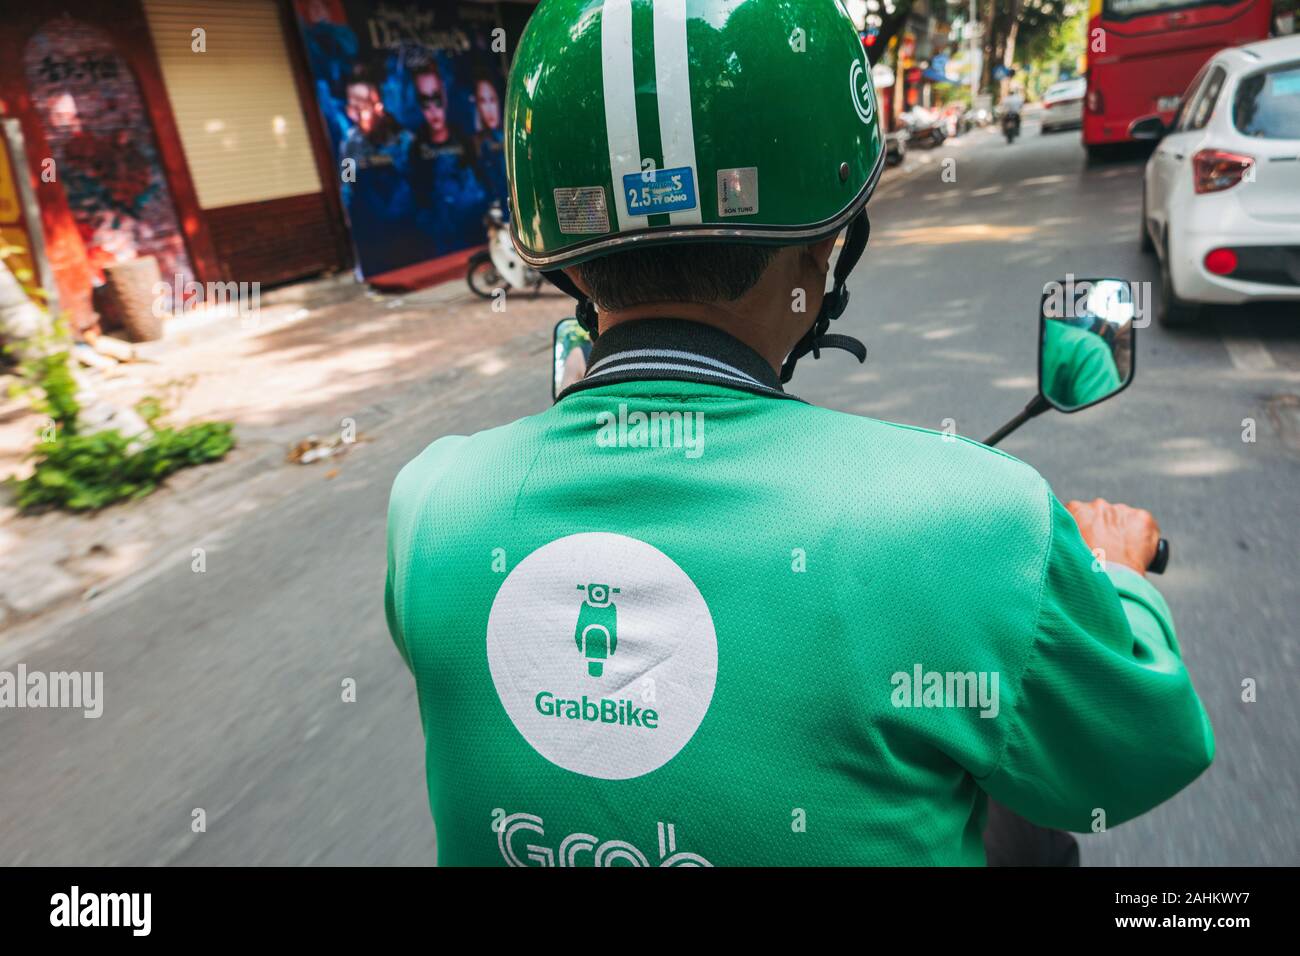 The view from the back of a Grab Bike as the rider navigates traffic in Hanoi, Vietnam, wearing a company branded helmet and shirt Stock Photo